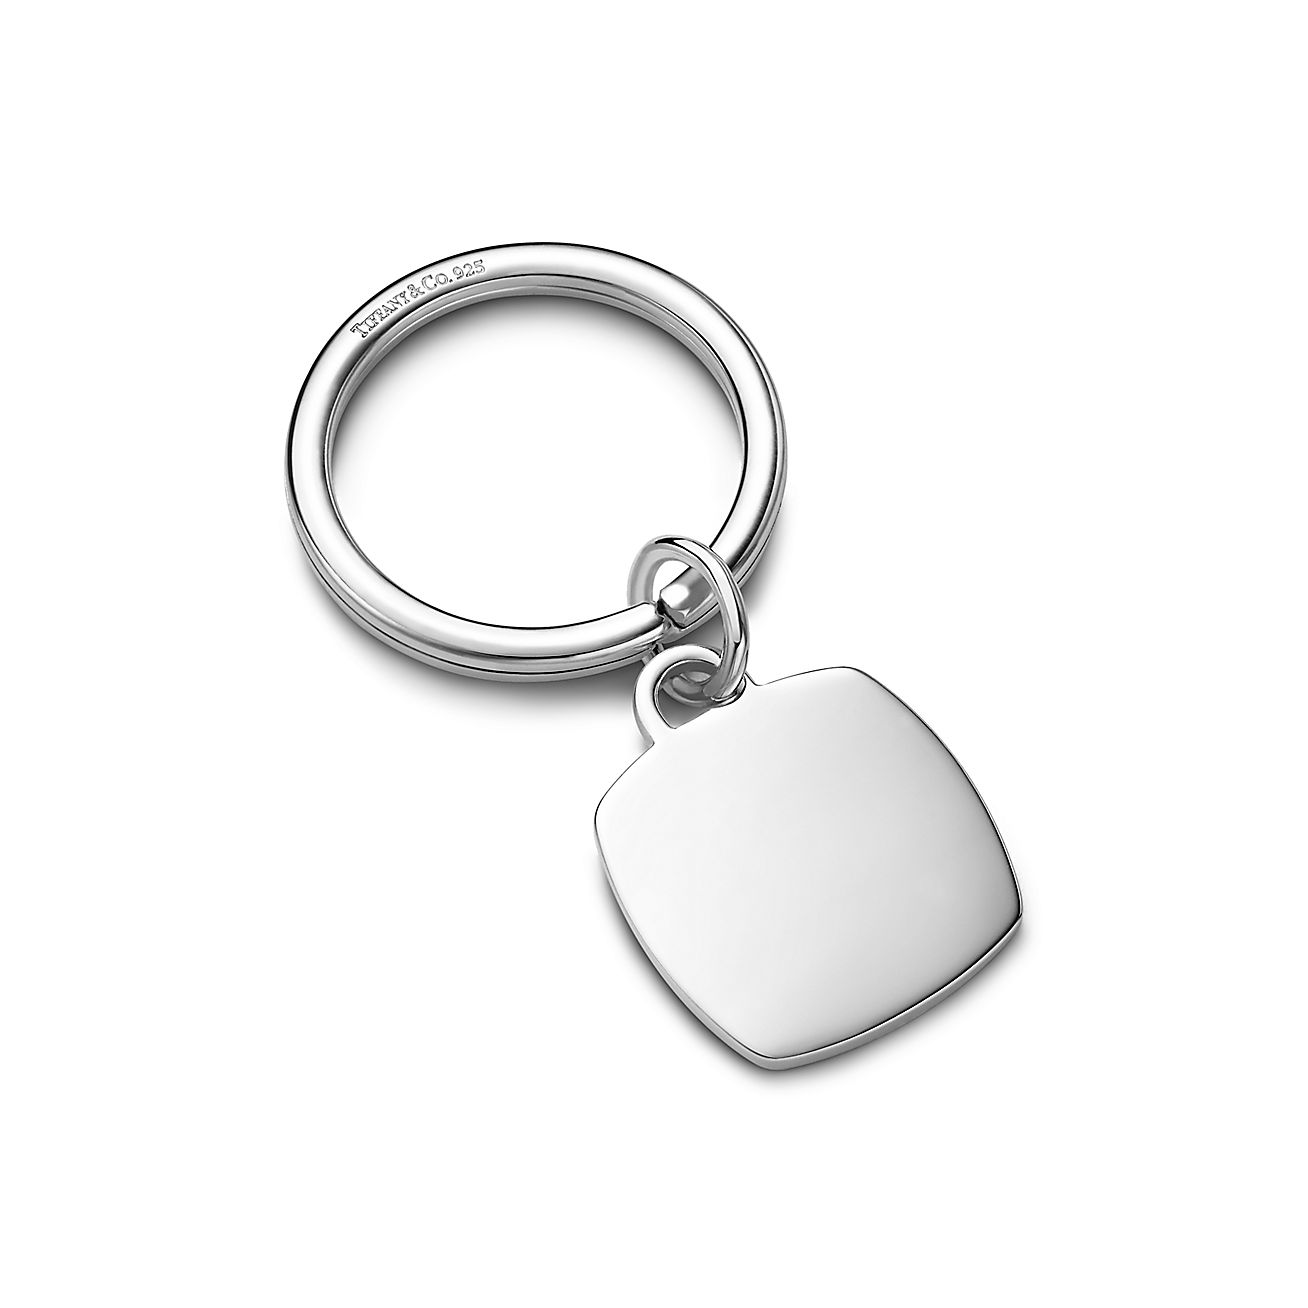 Cushion tag key ring in sterling silver.